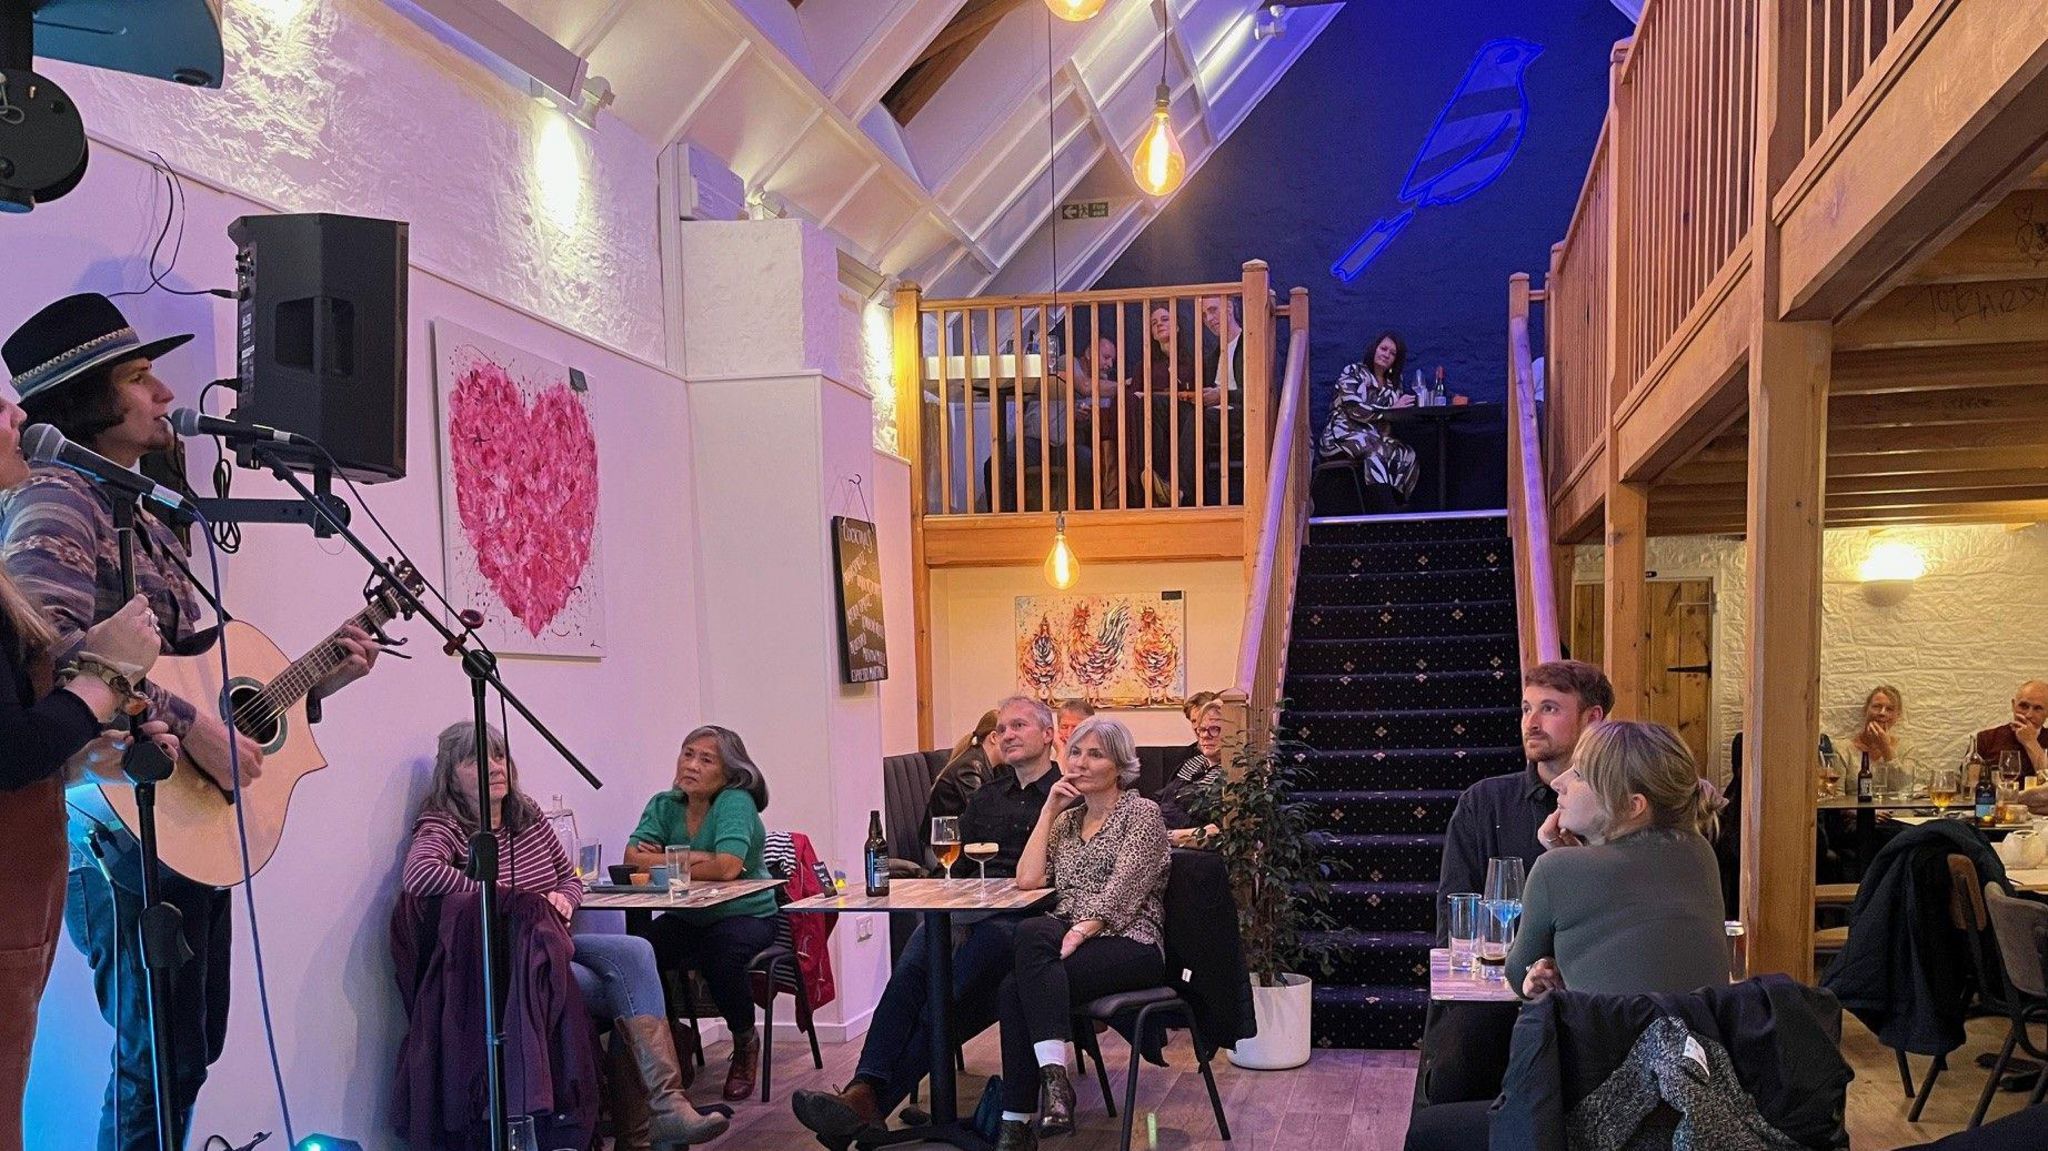 People sit at tables and watch local artist play guitar on stage in the cafe music venue